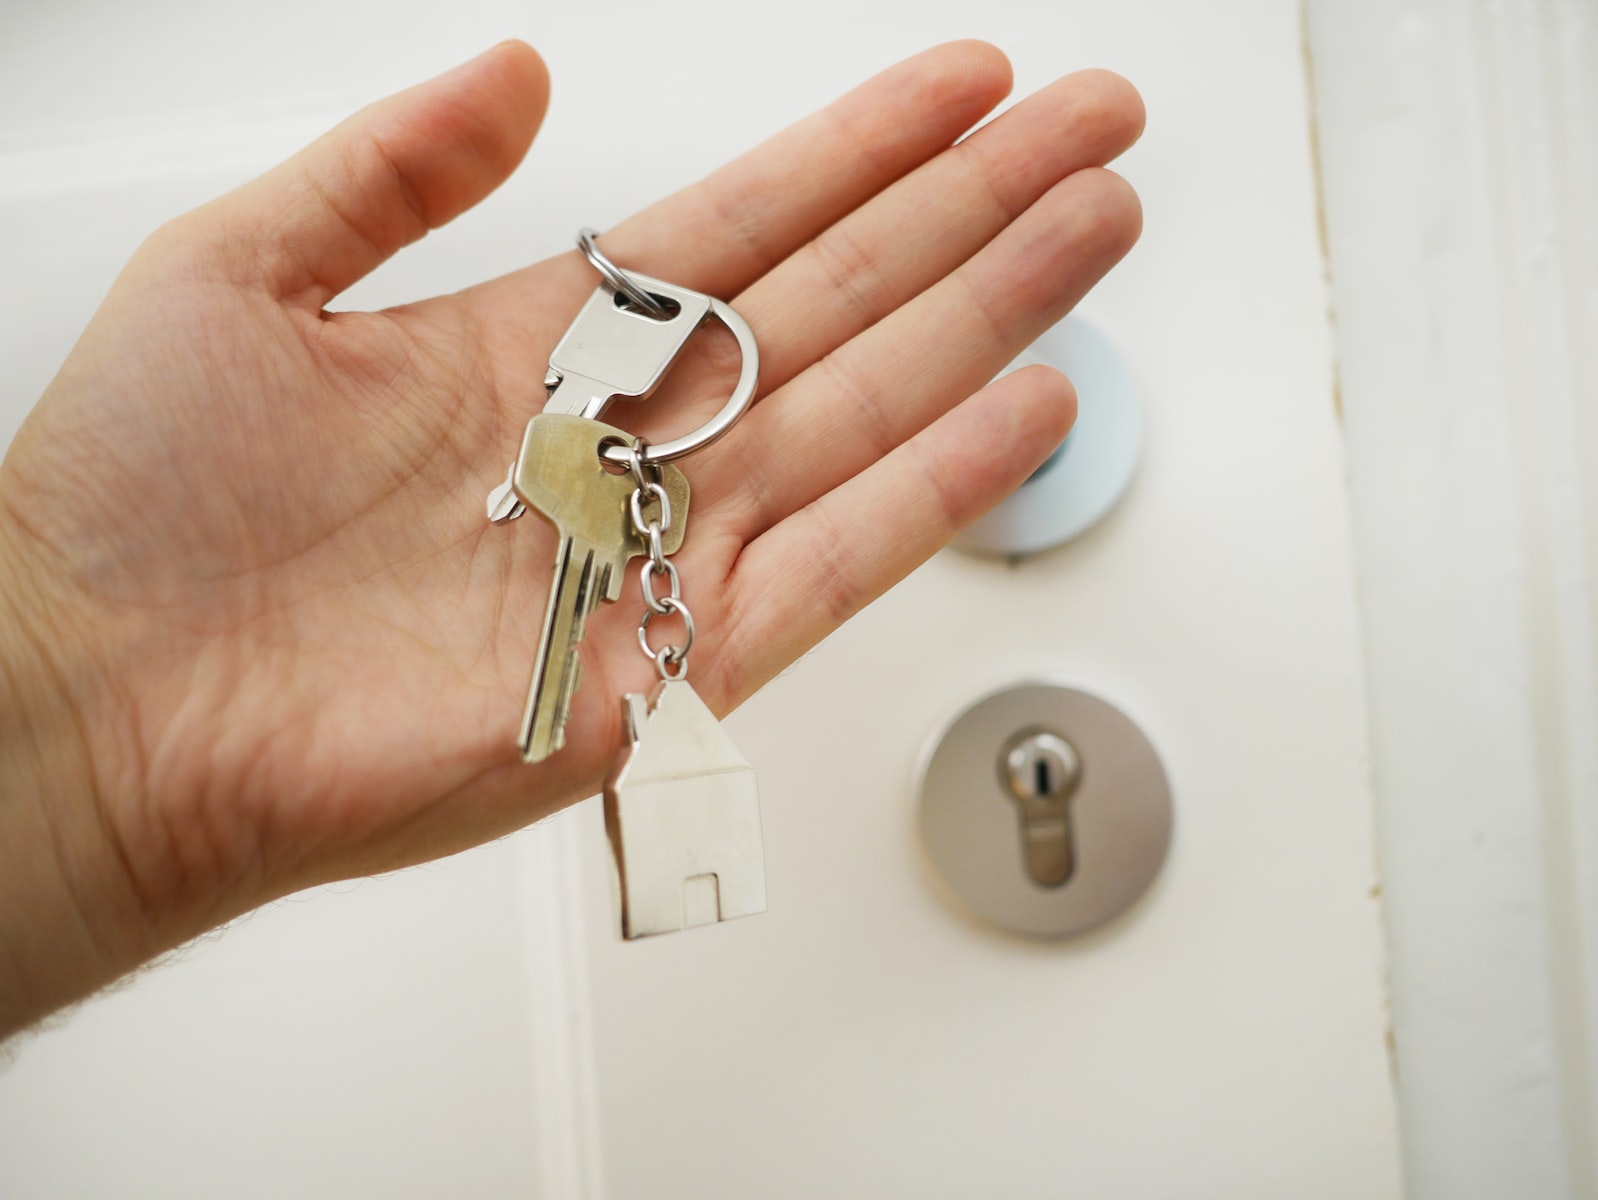 Keys in a person's hand in front of a locked door